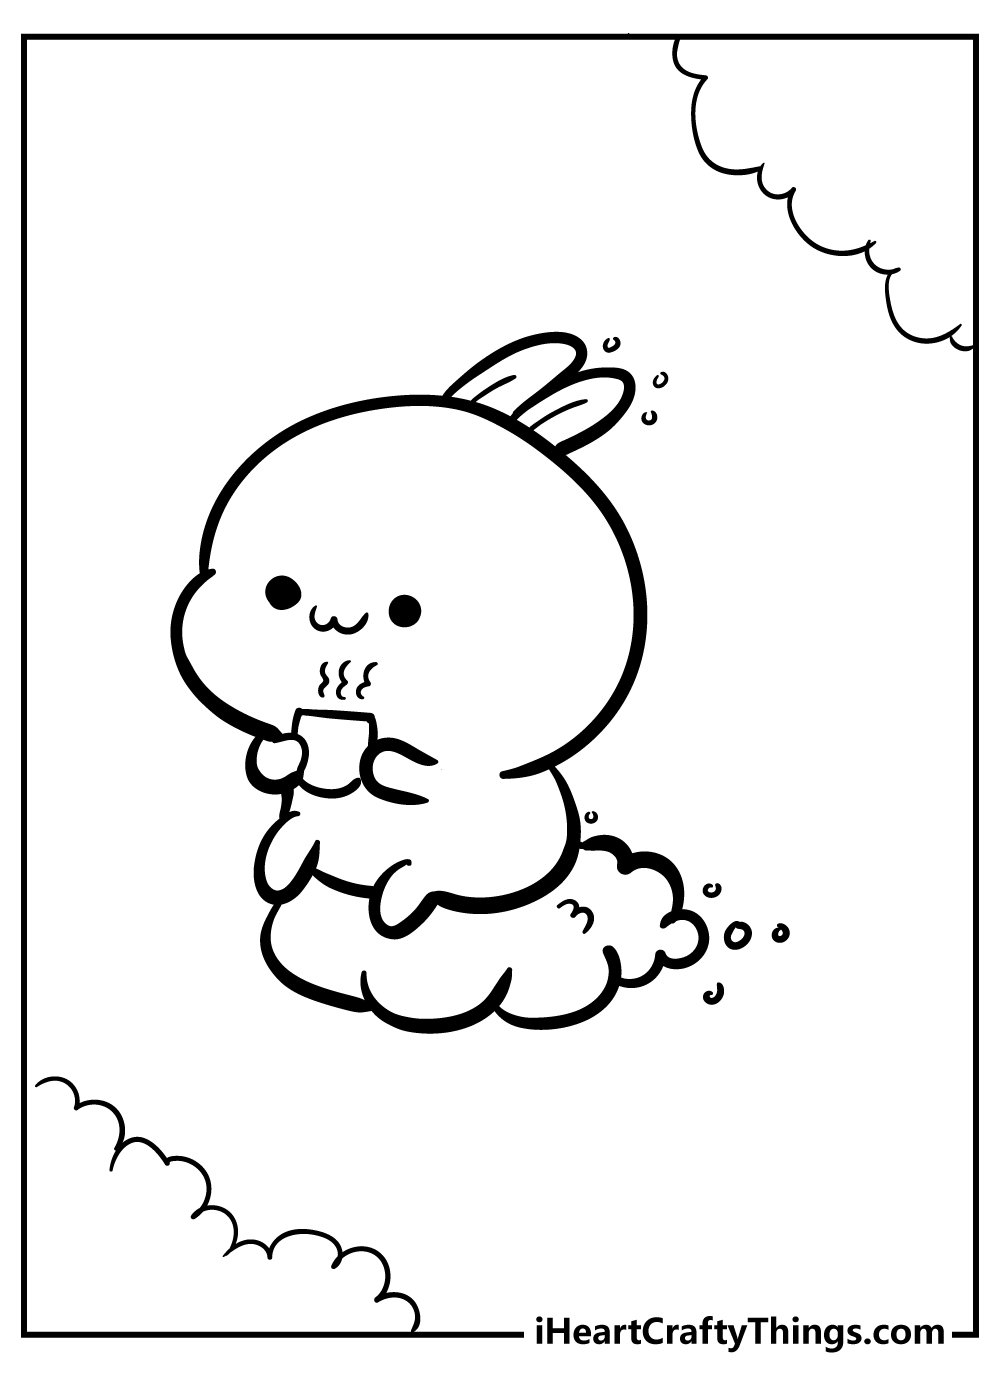 Kawaii Coloring Pages Updated 20